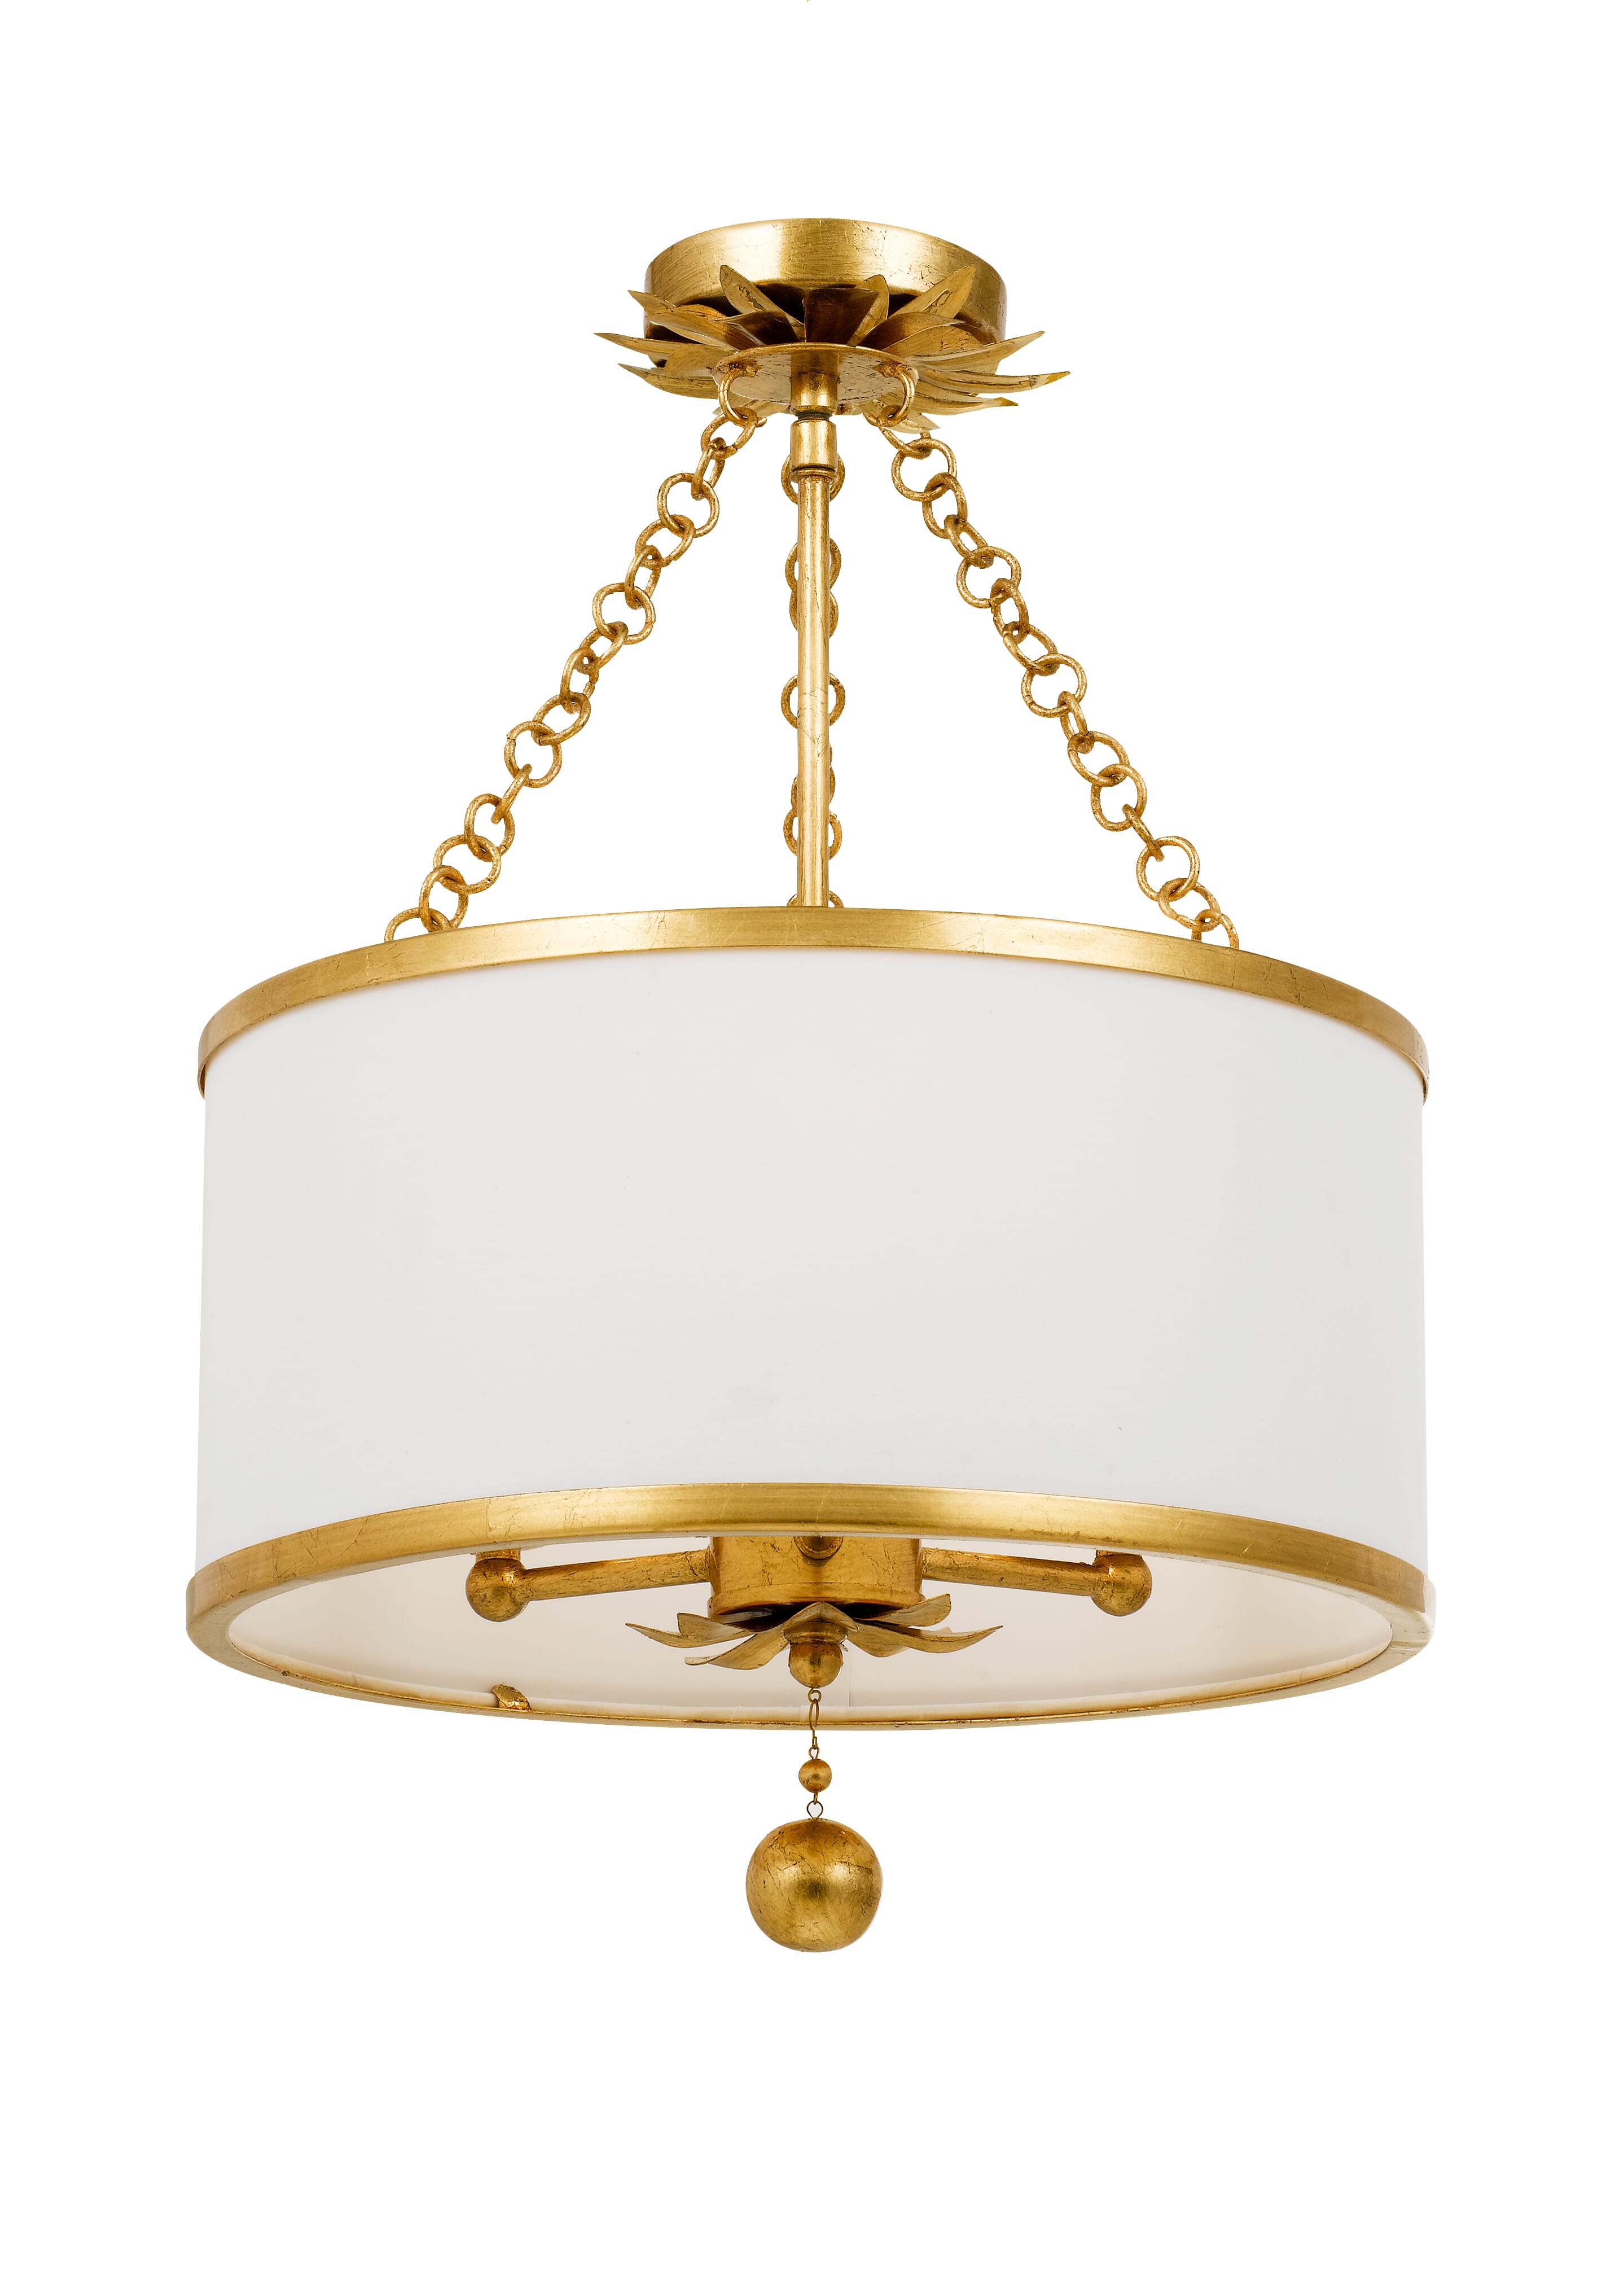 Broche 3-Light 14"" Ceiling Light in Antique Gold -  Crystorama, 513-GA_CEILING